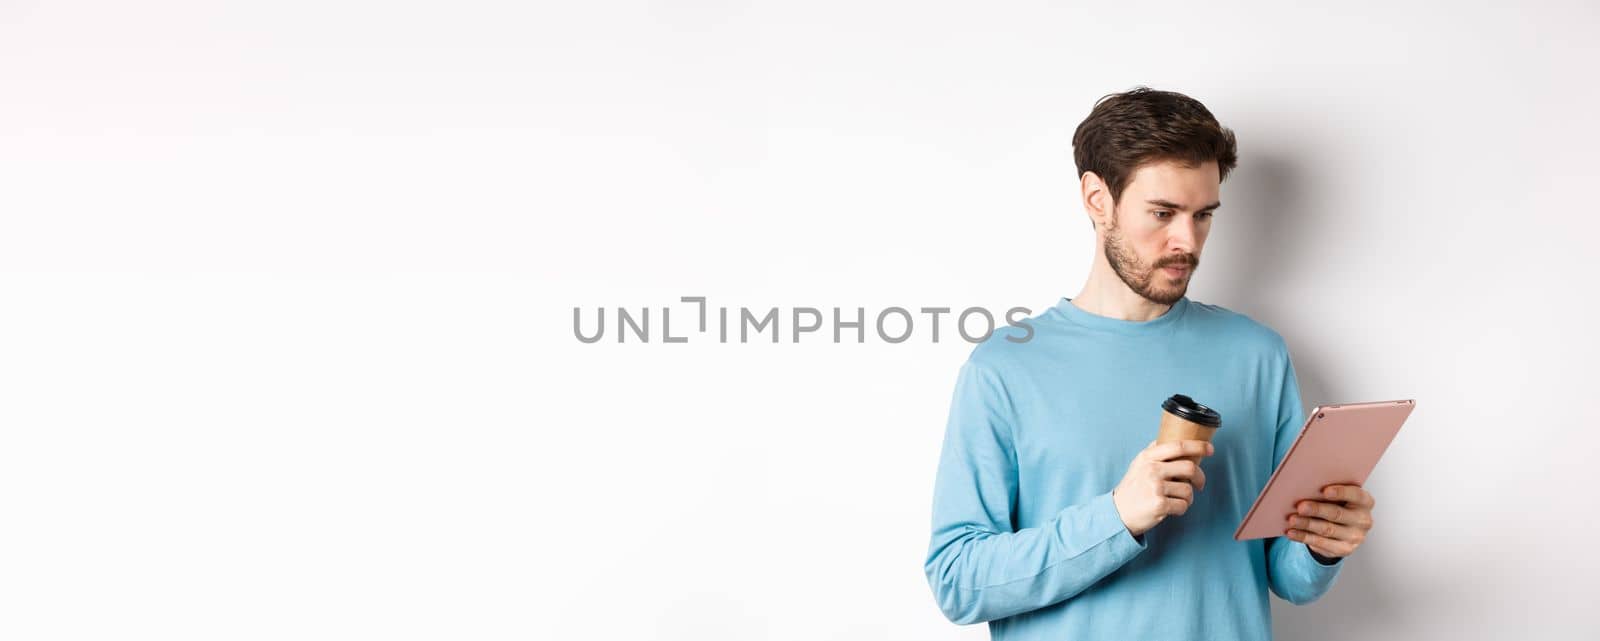 Man reading news online in digital tablet, looking serious at screen while drinking coffee from paper cup, standing over white background.